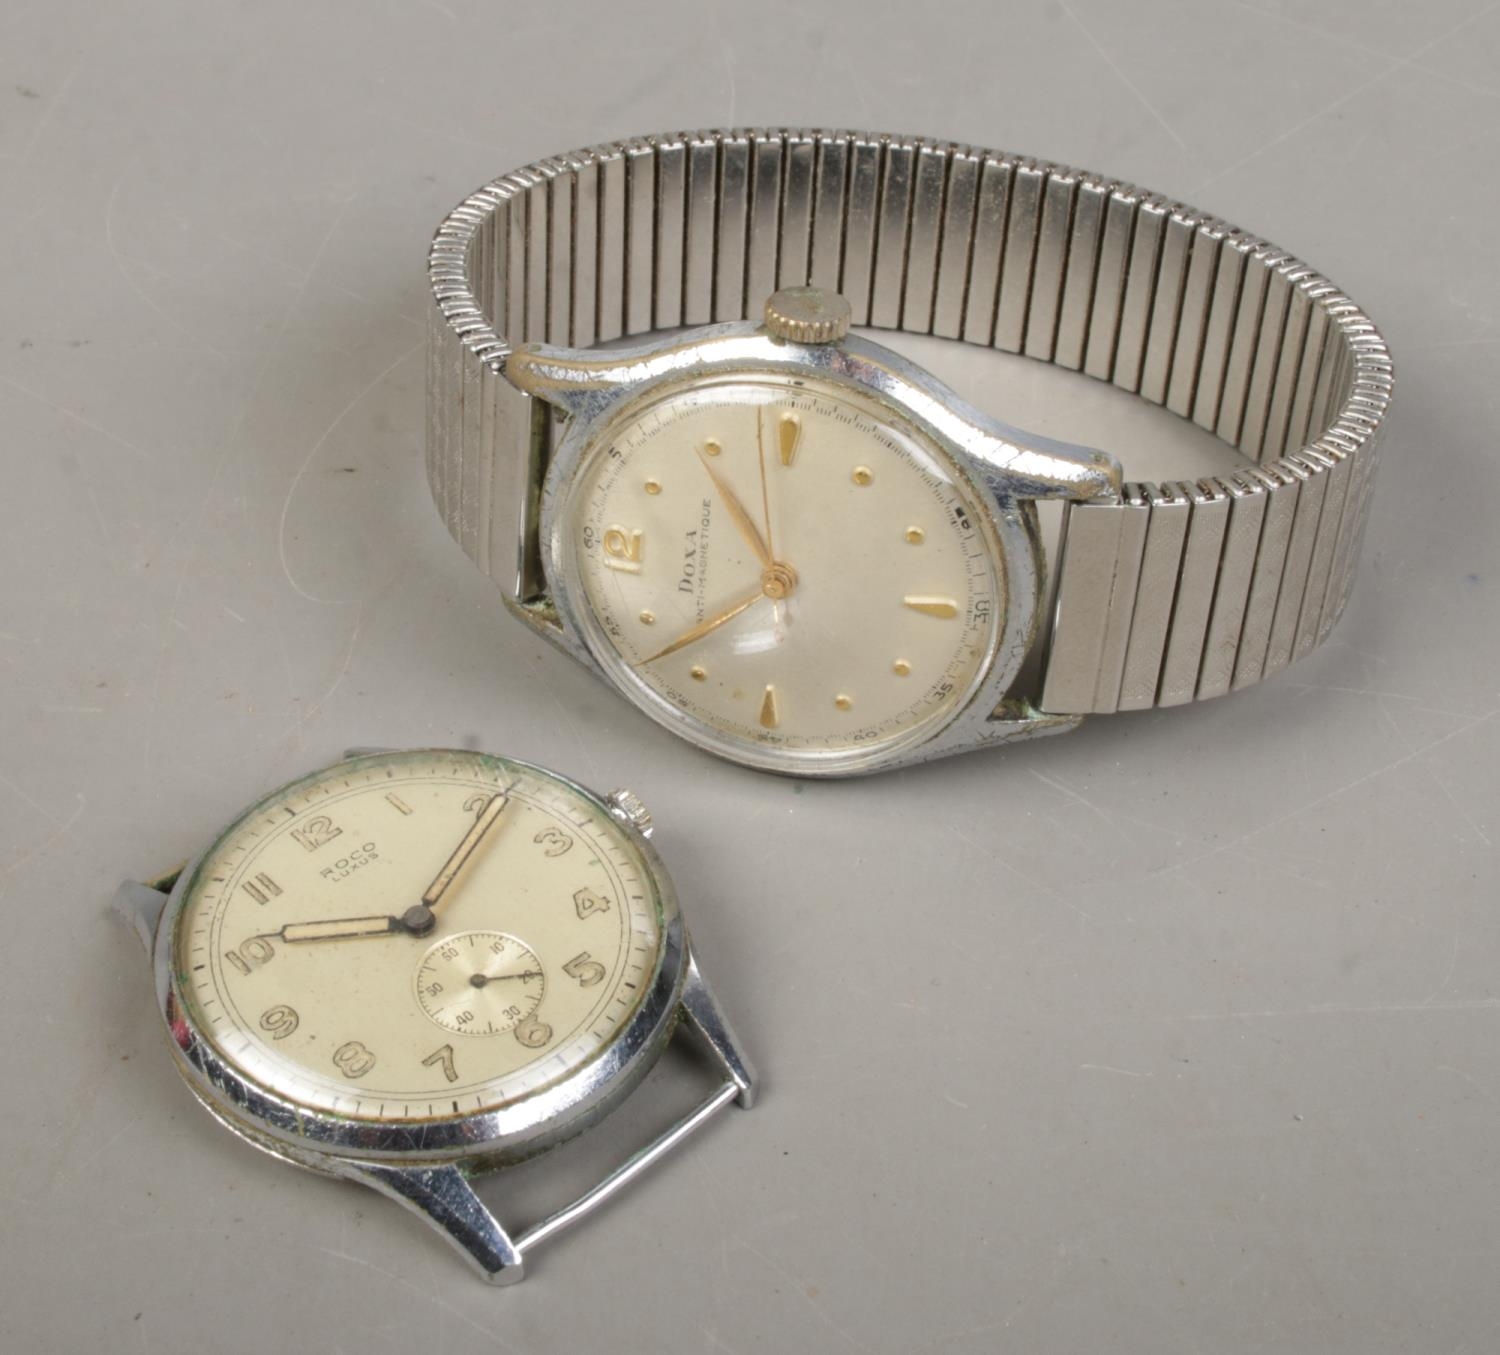 Two gents vintage manual watches. Includes Doxa and Roco watch head.